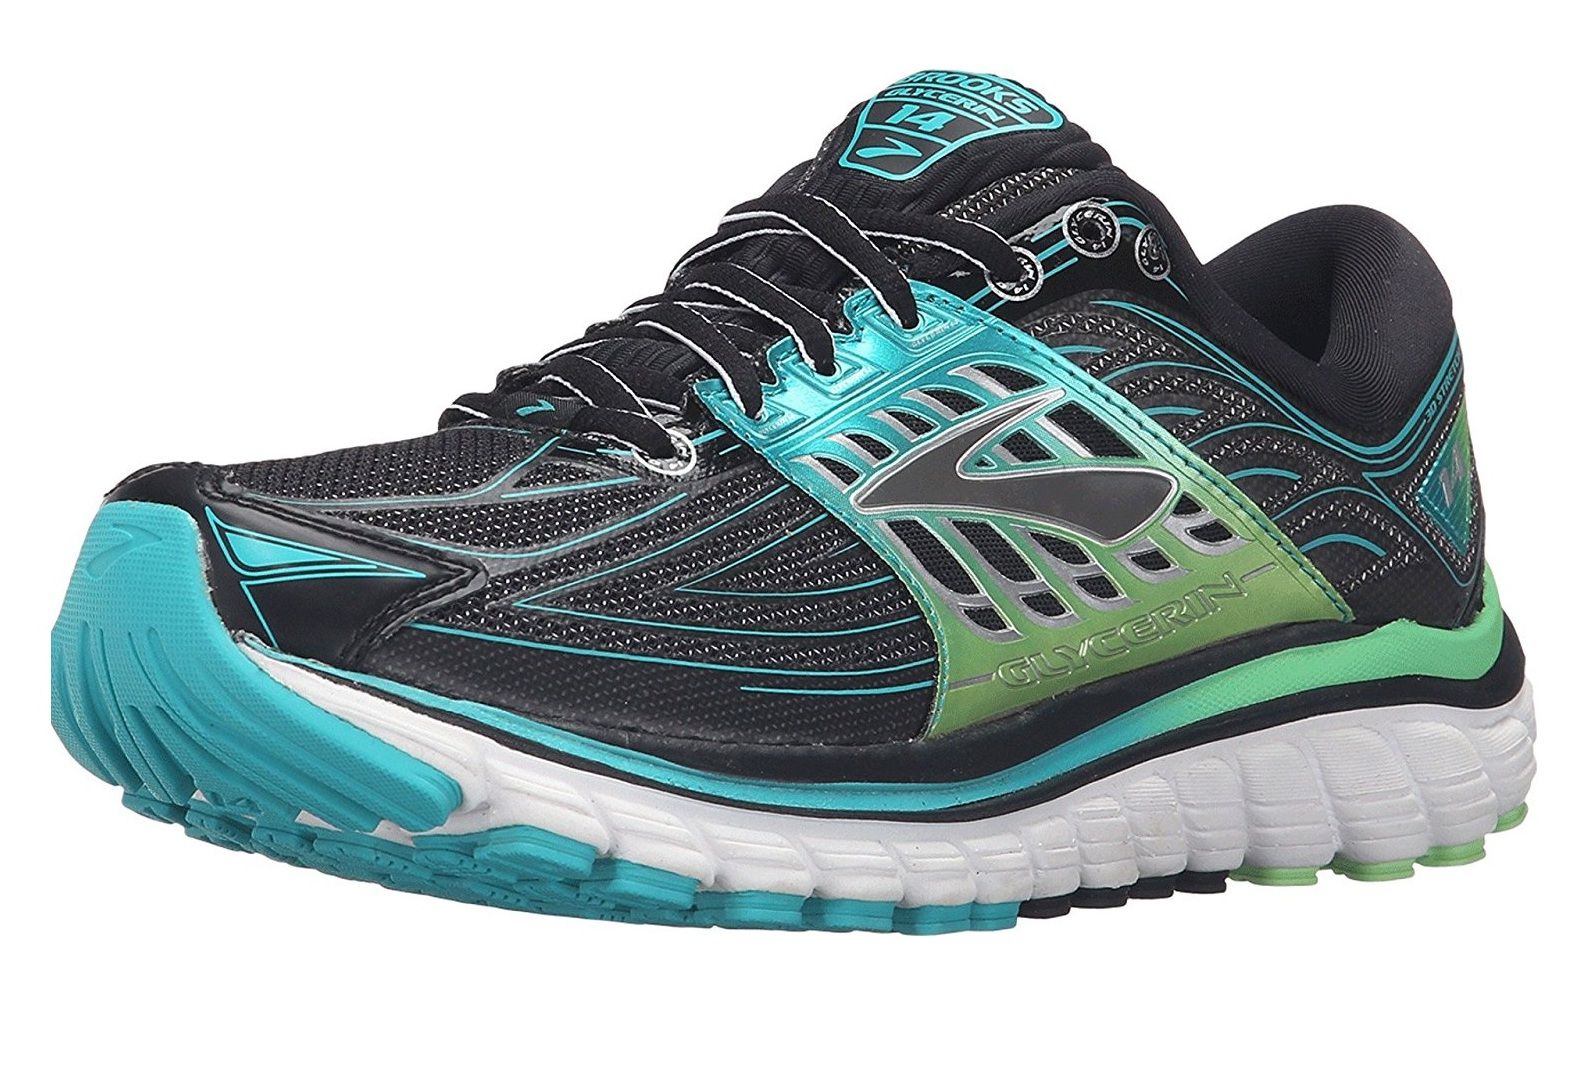 The 10 Best Cushioned Shoes for Walkers to Buy in 2018